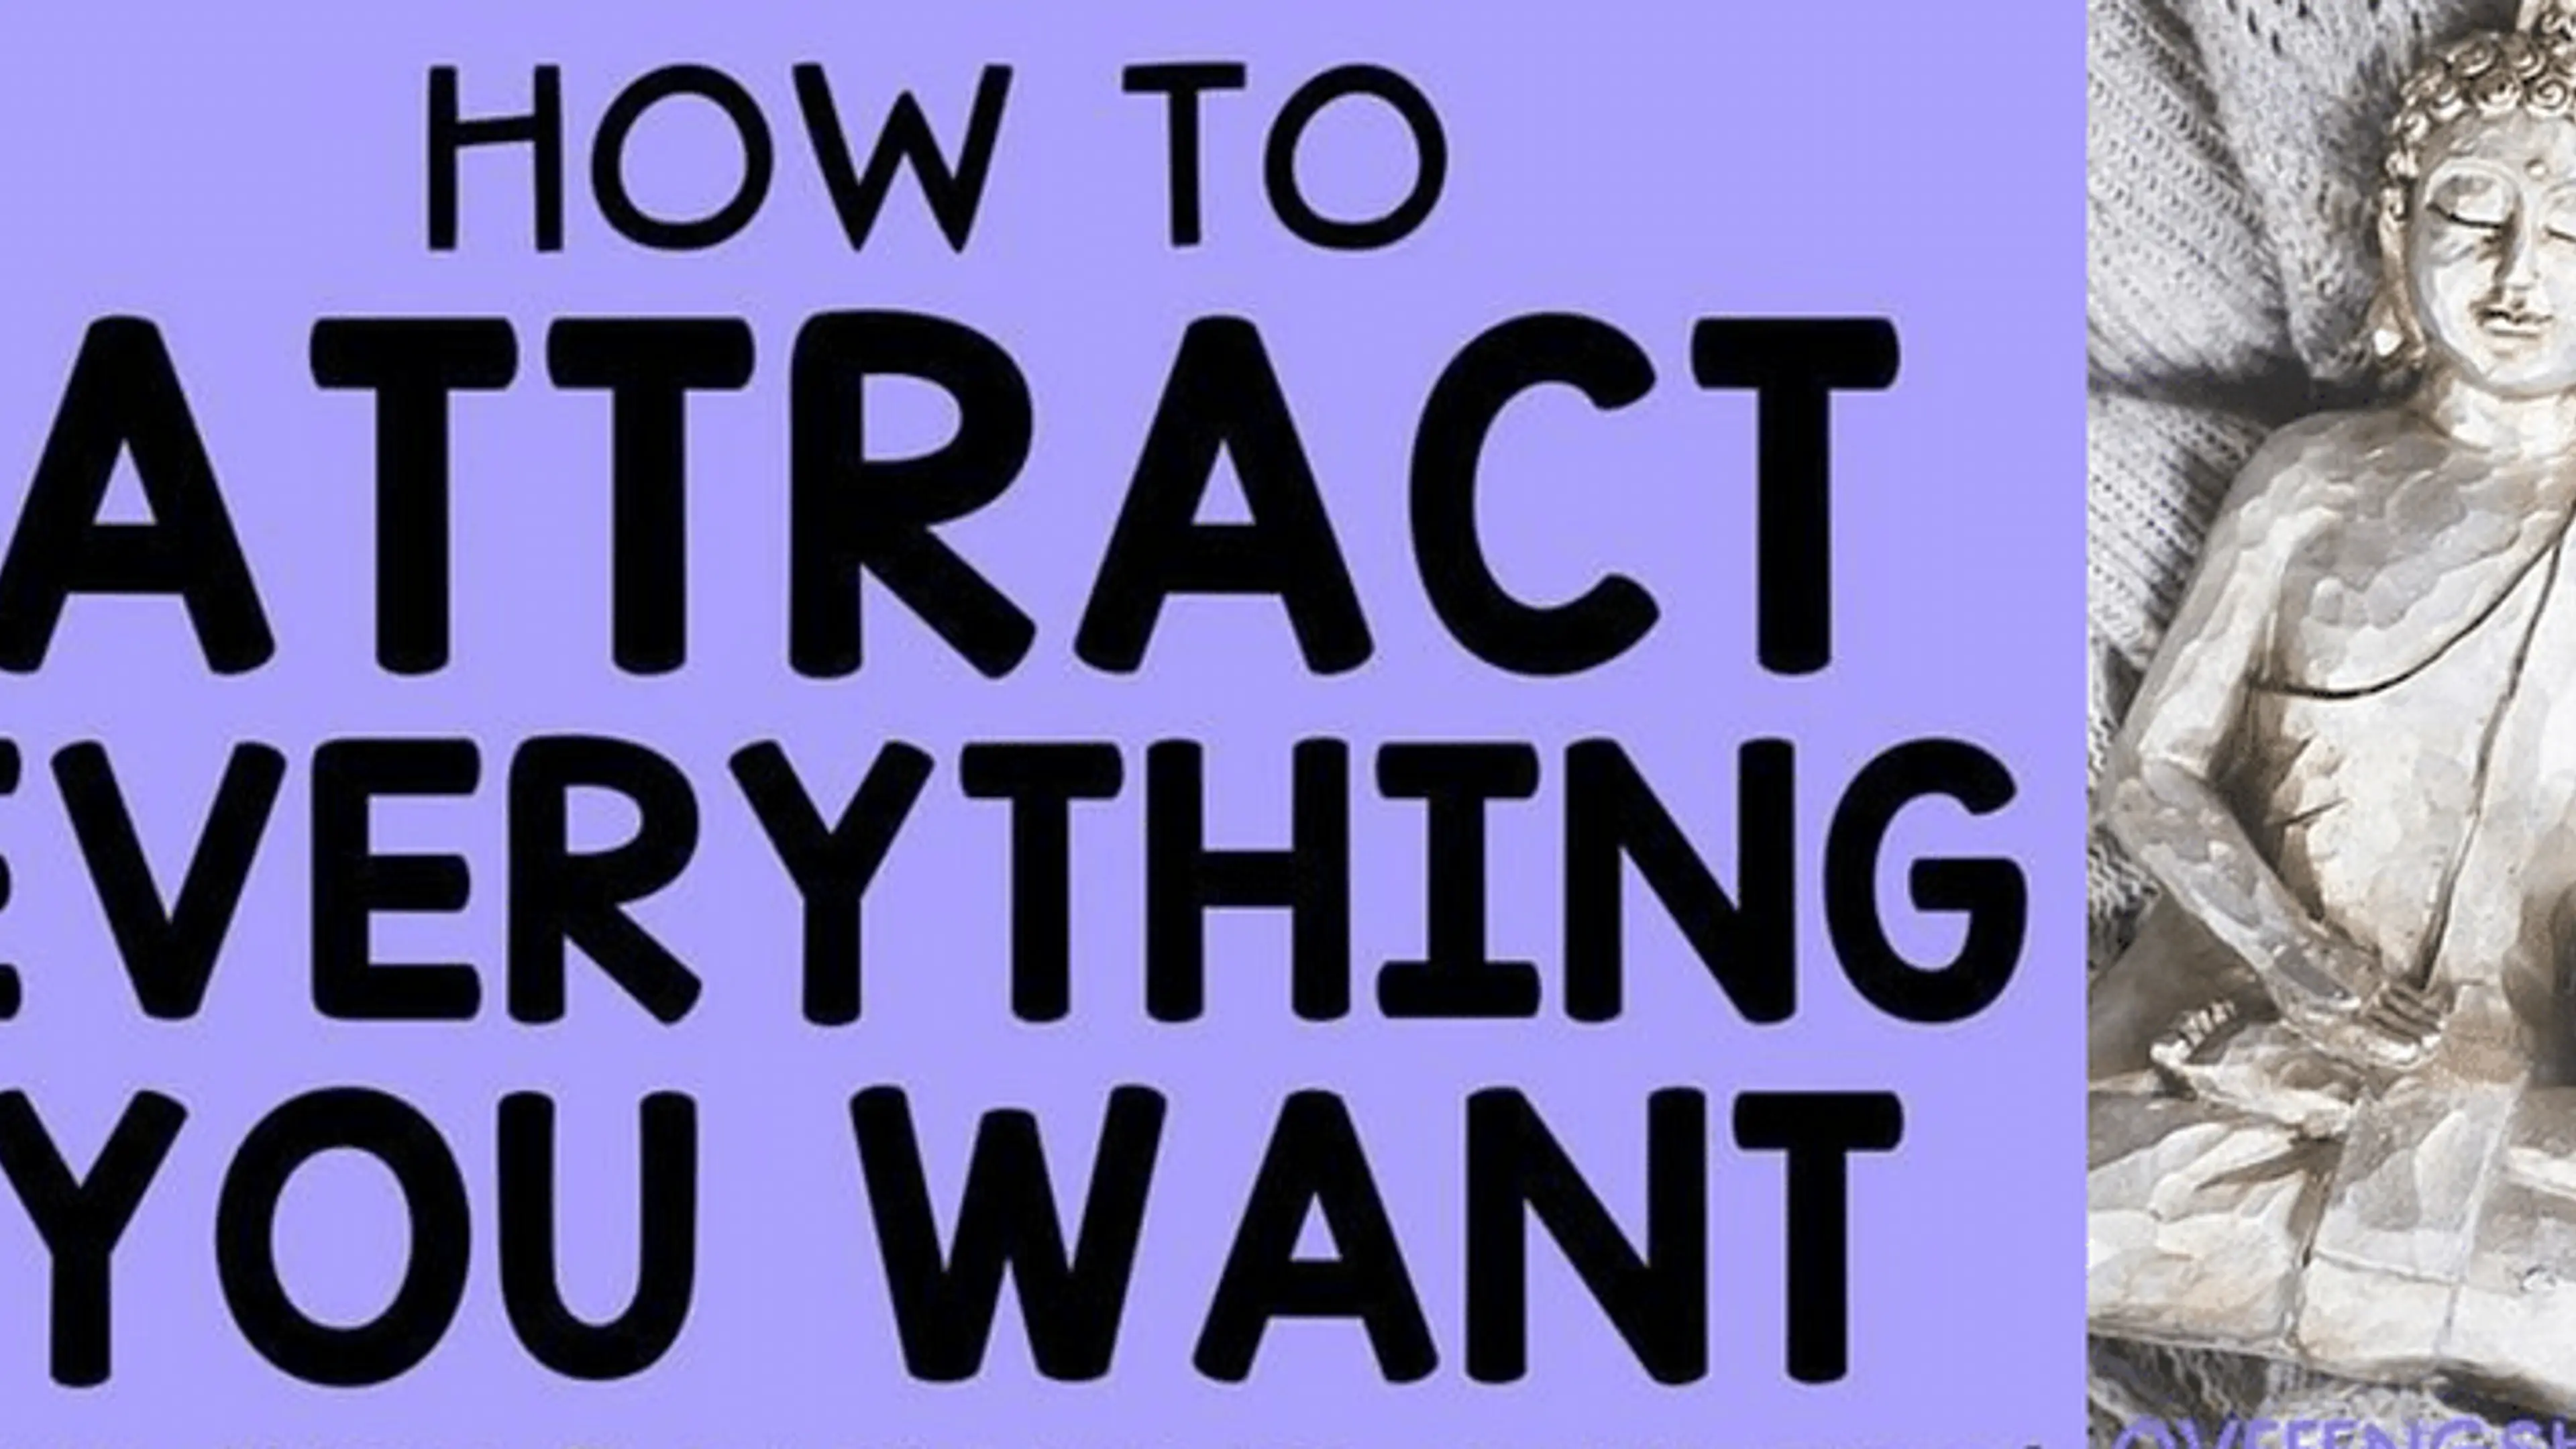 How to Attract Everything You Want with Feng Shui Secrets